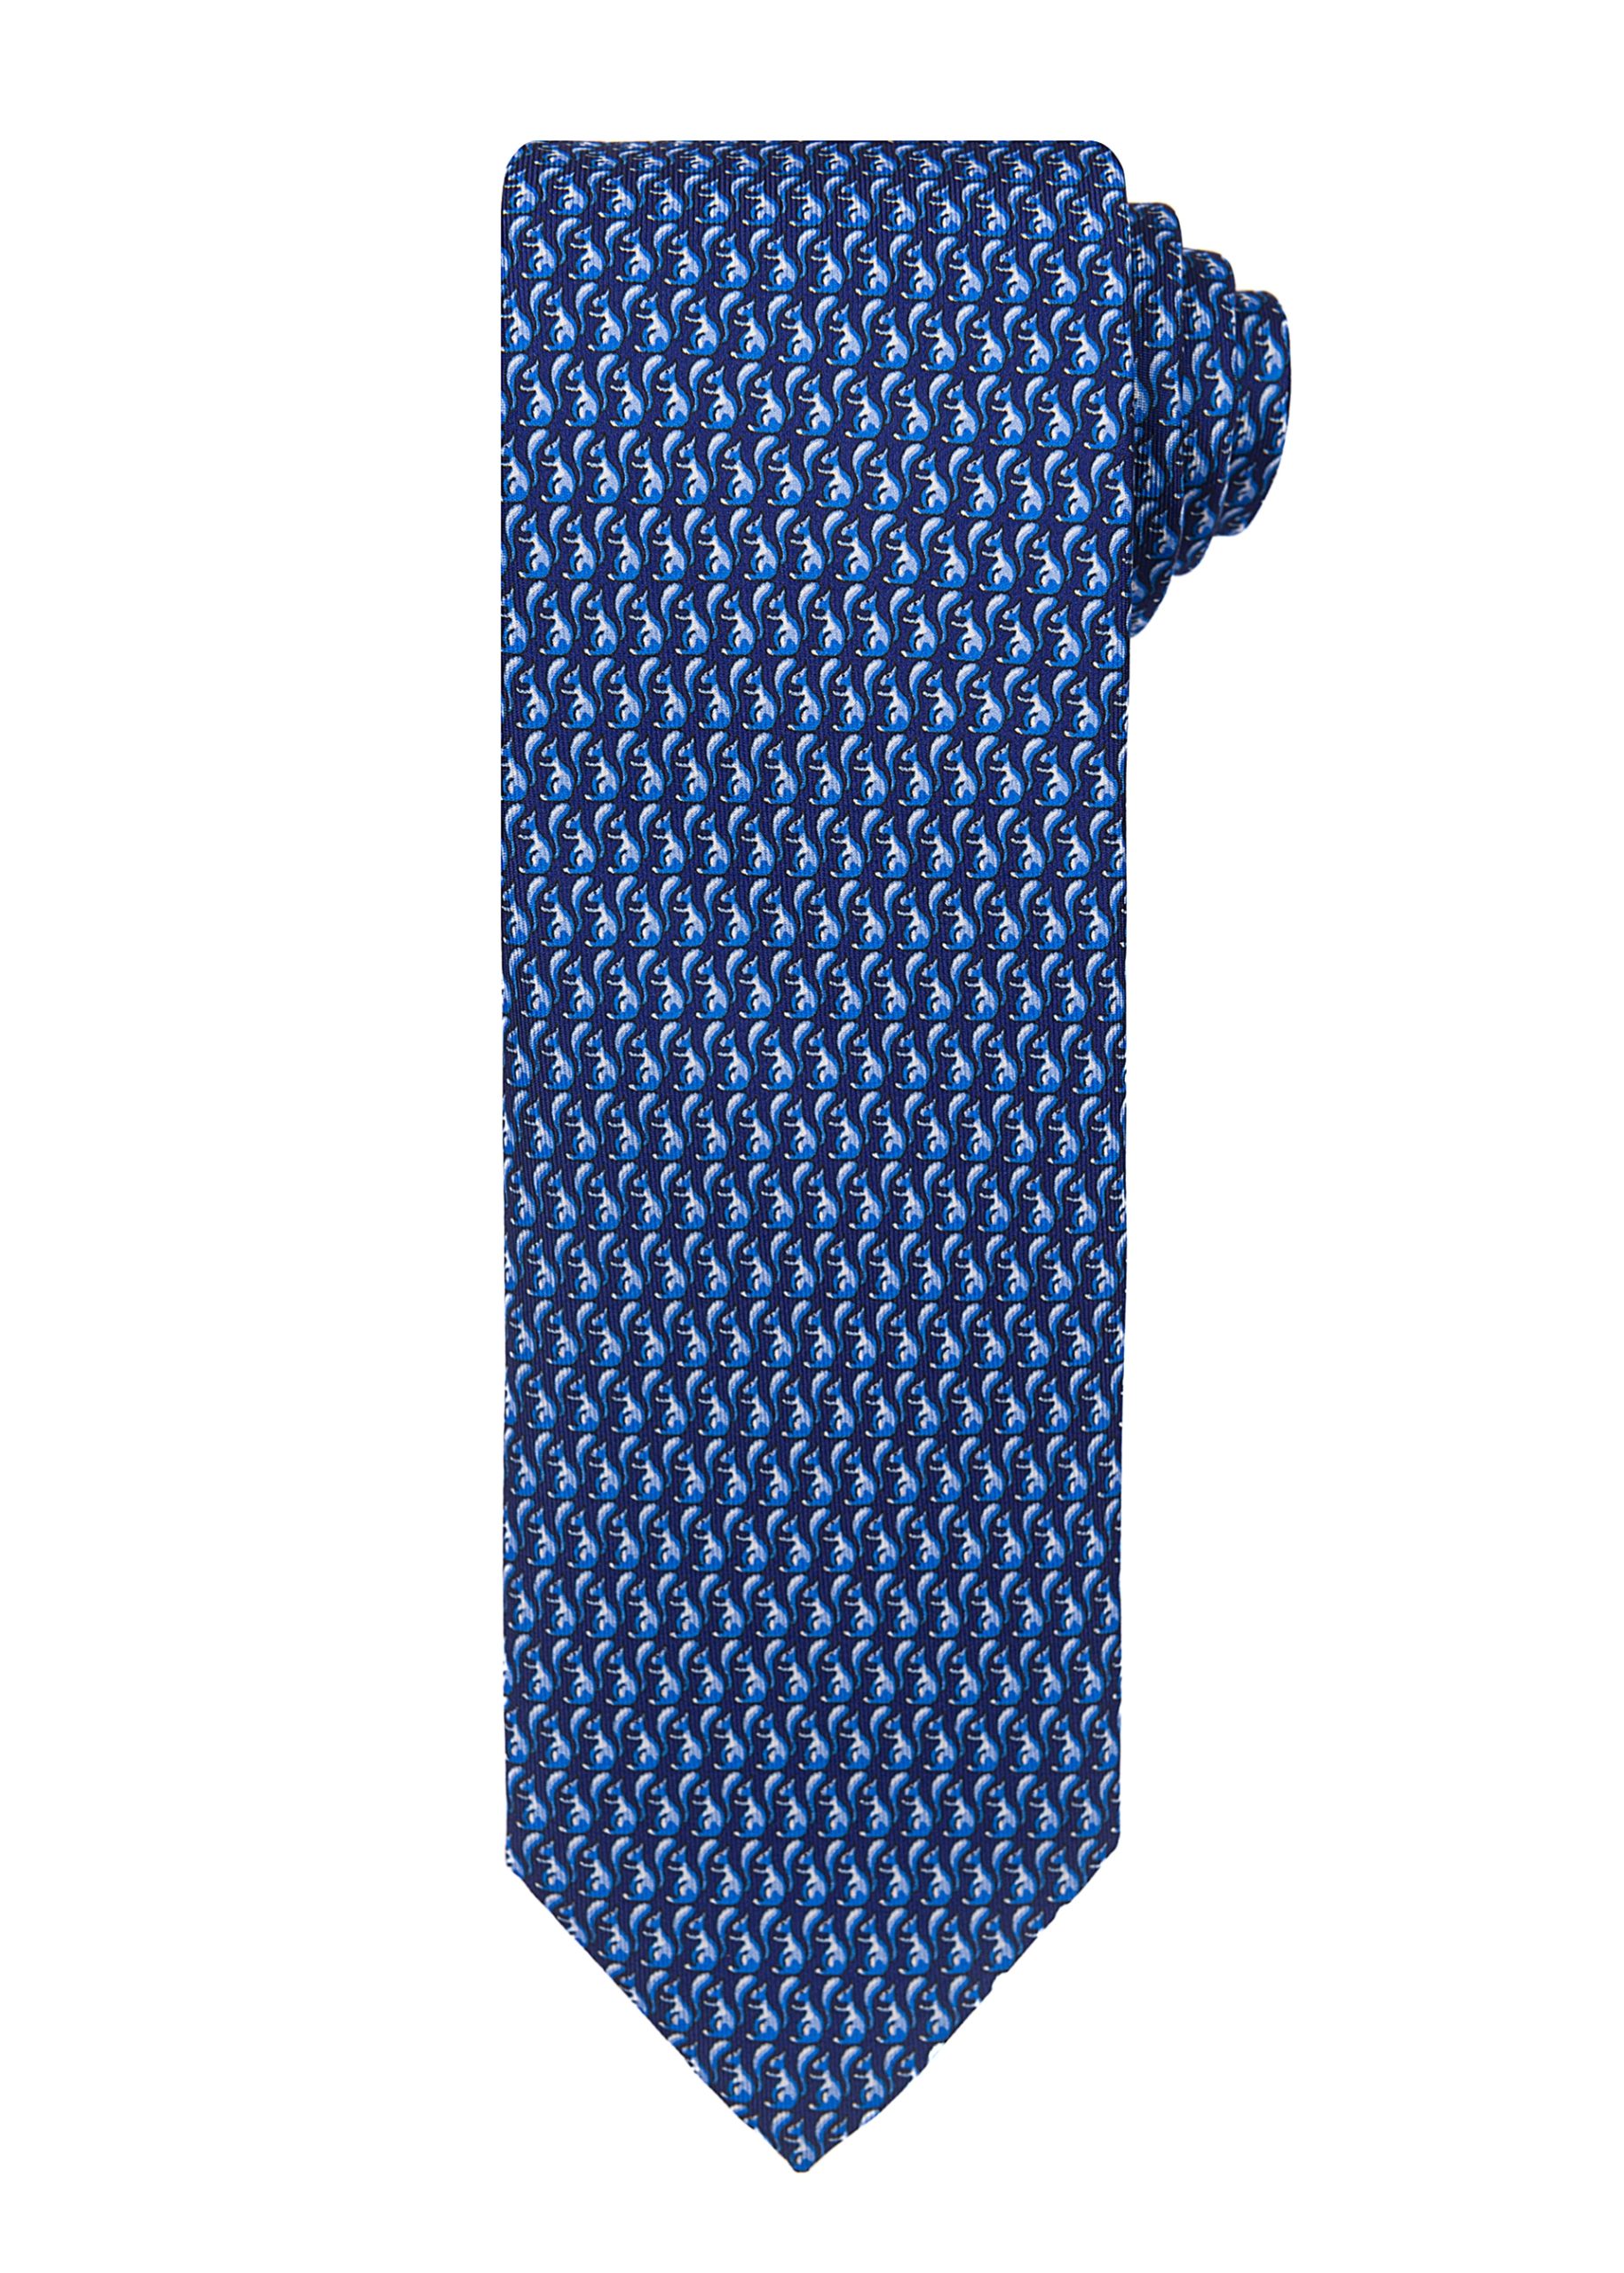 Navy squirrel tie by Roderick Charles London